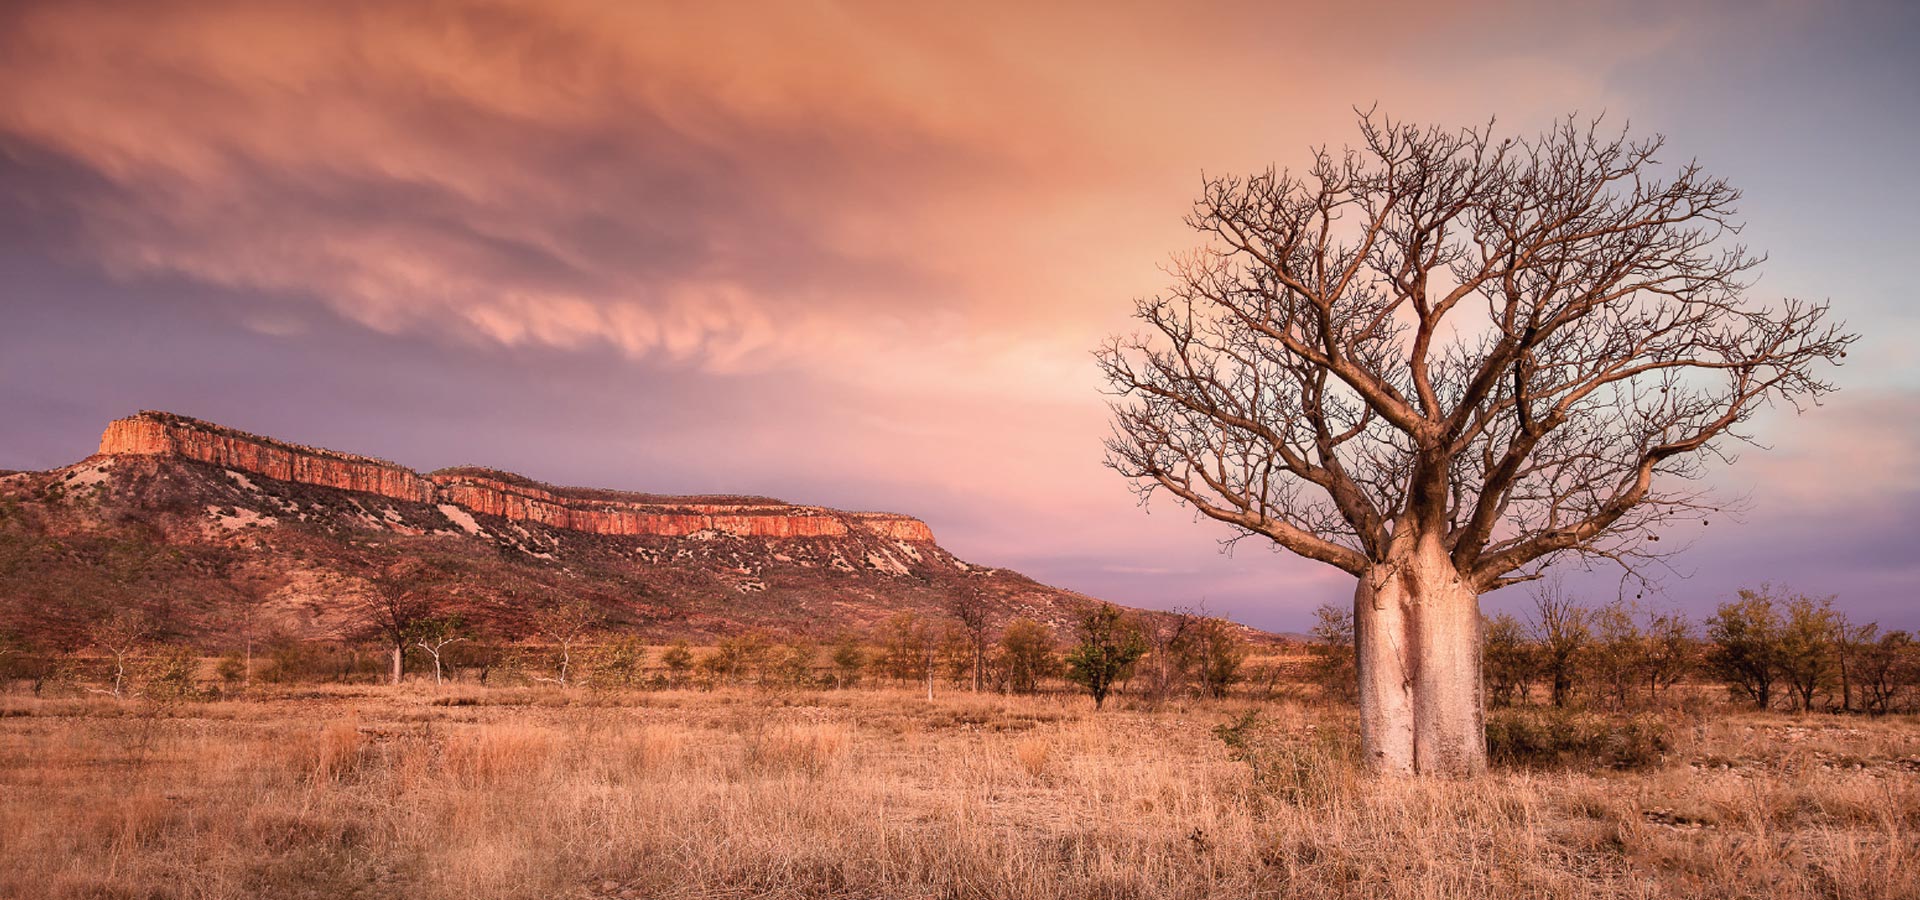 Experience the Kimberley and Relax in style